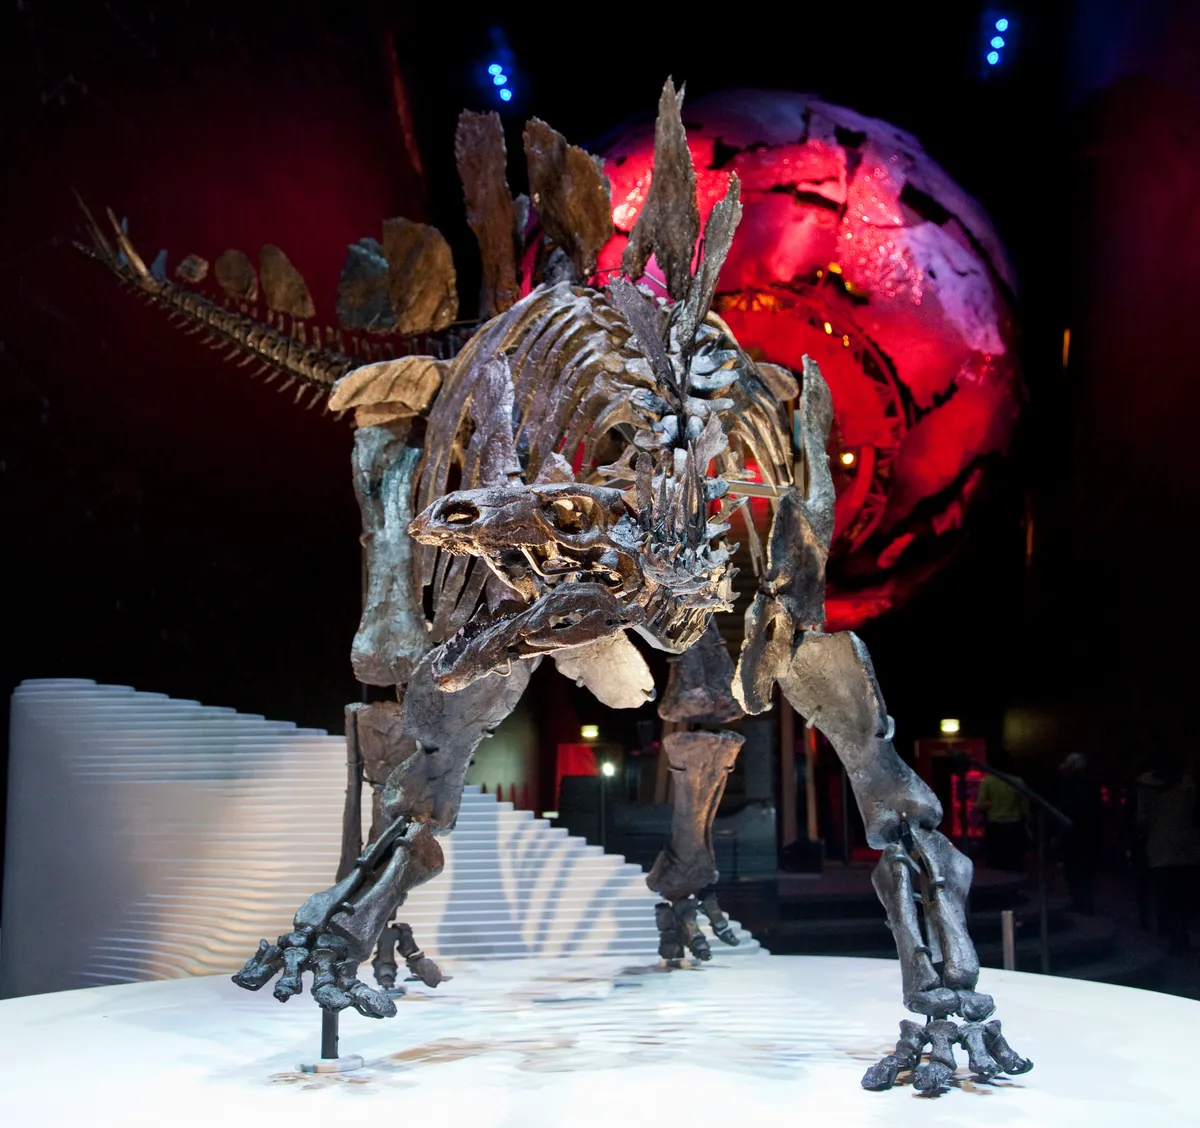 Sophie the Stegosaurus at the NHM. © Trustees of the Natural History Museum